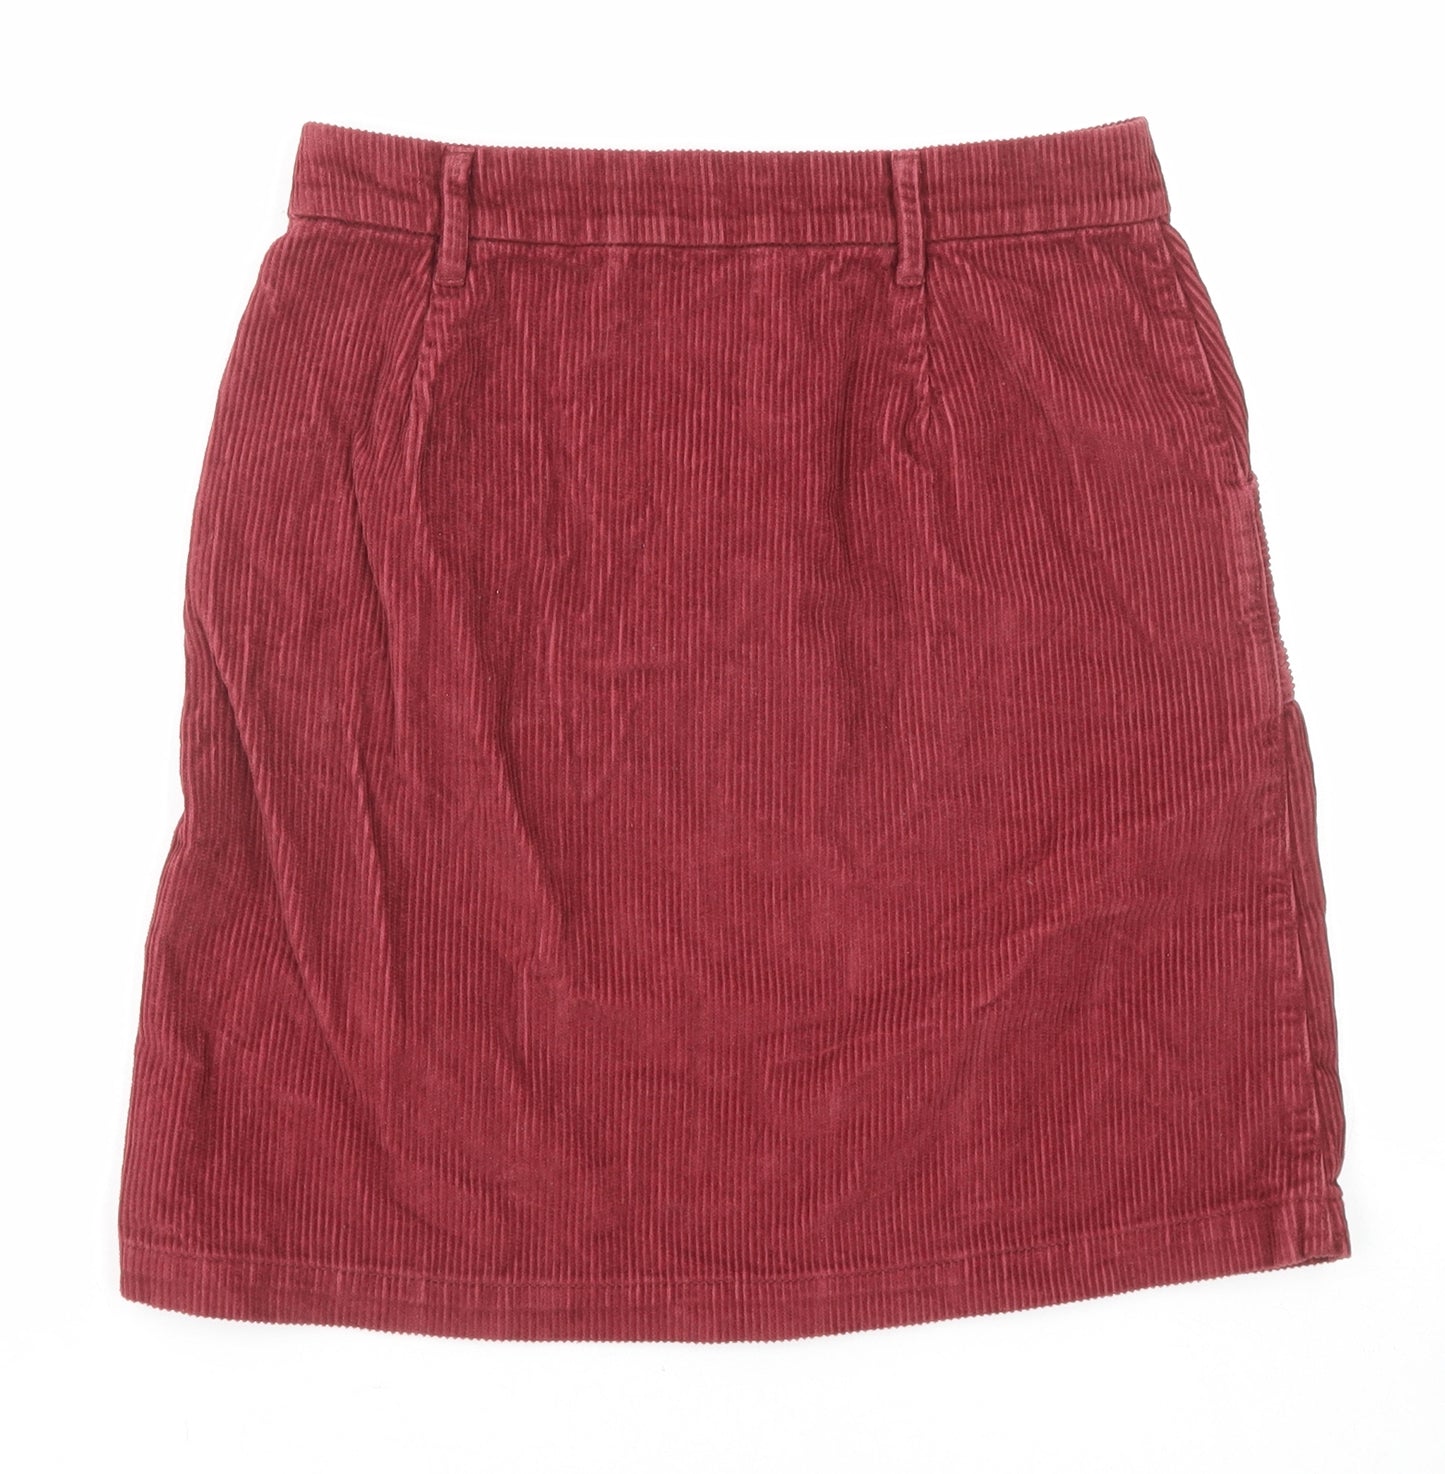 TU Womens Red Cotton A-Line Skirt Size 8 Zip